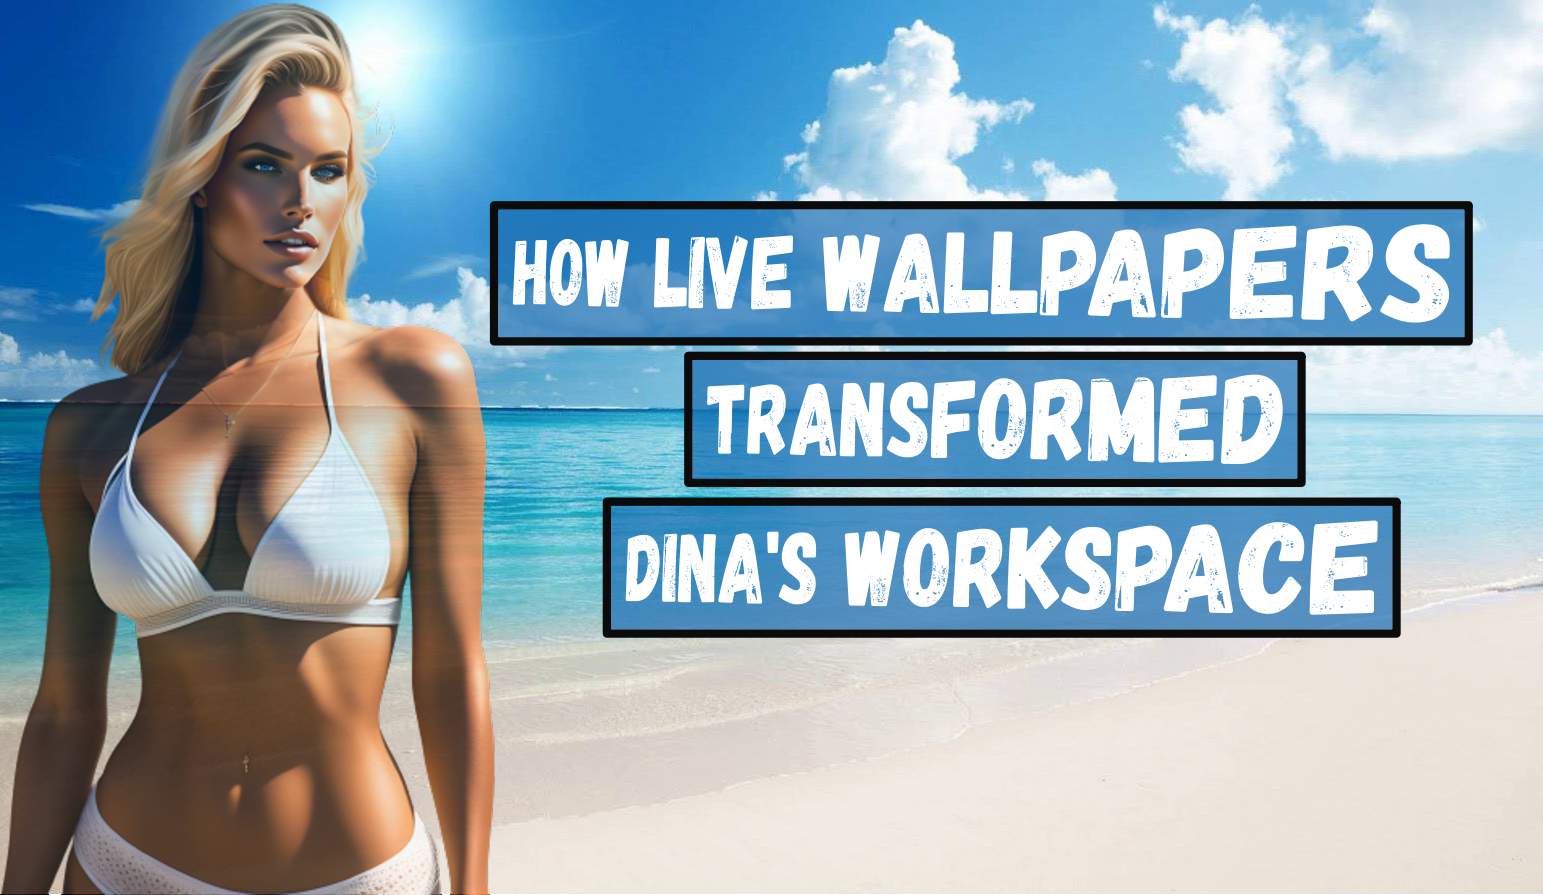 LiveWallpapers4Free.com | From Stillness to Inspiration: How Live Wallpapers Transformed Dina's Workspace